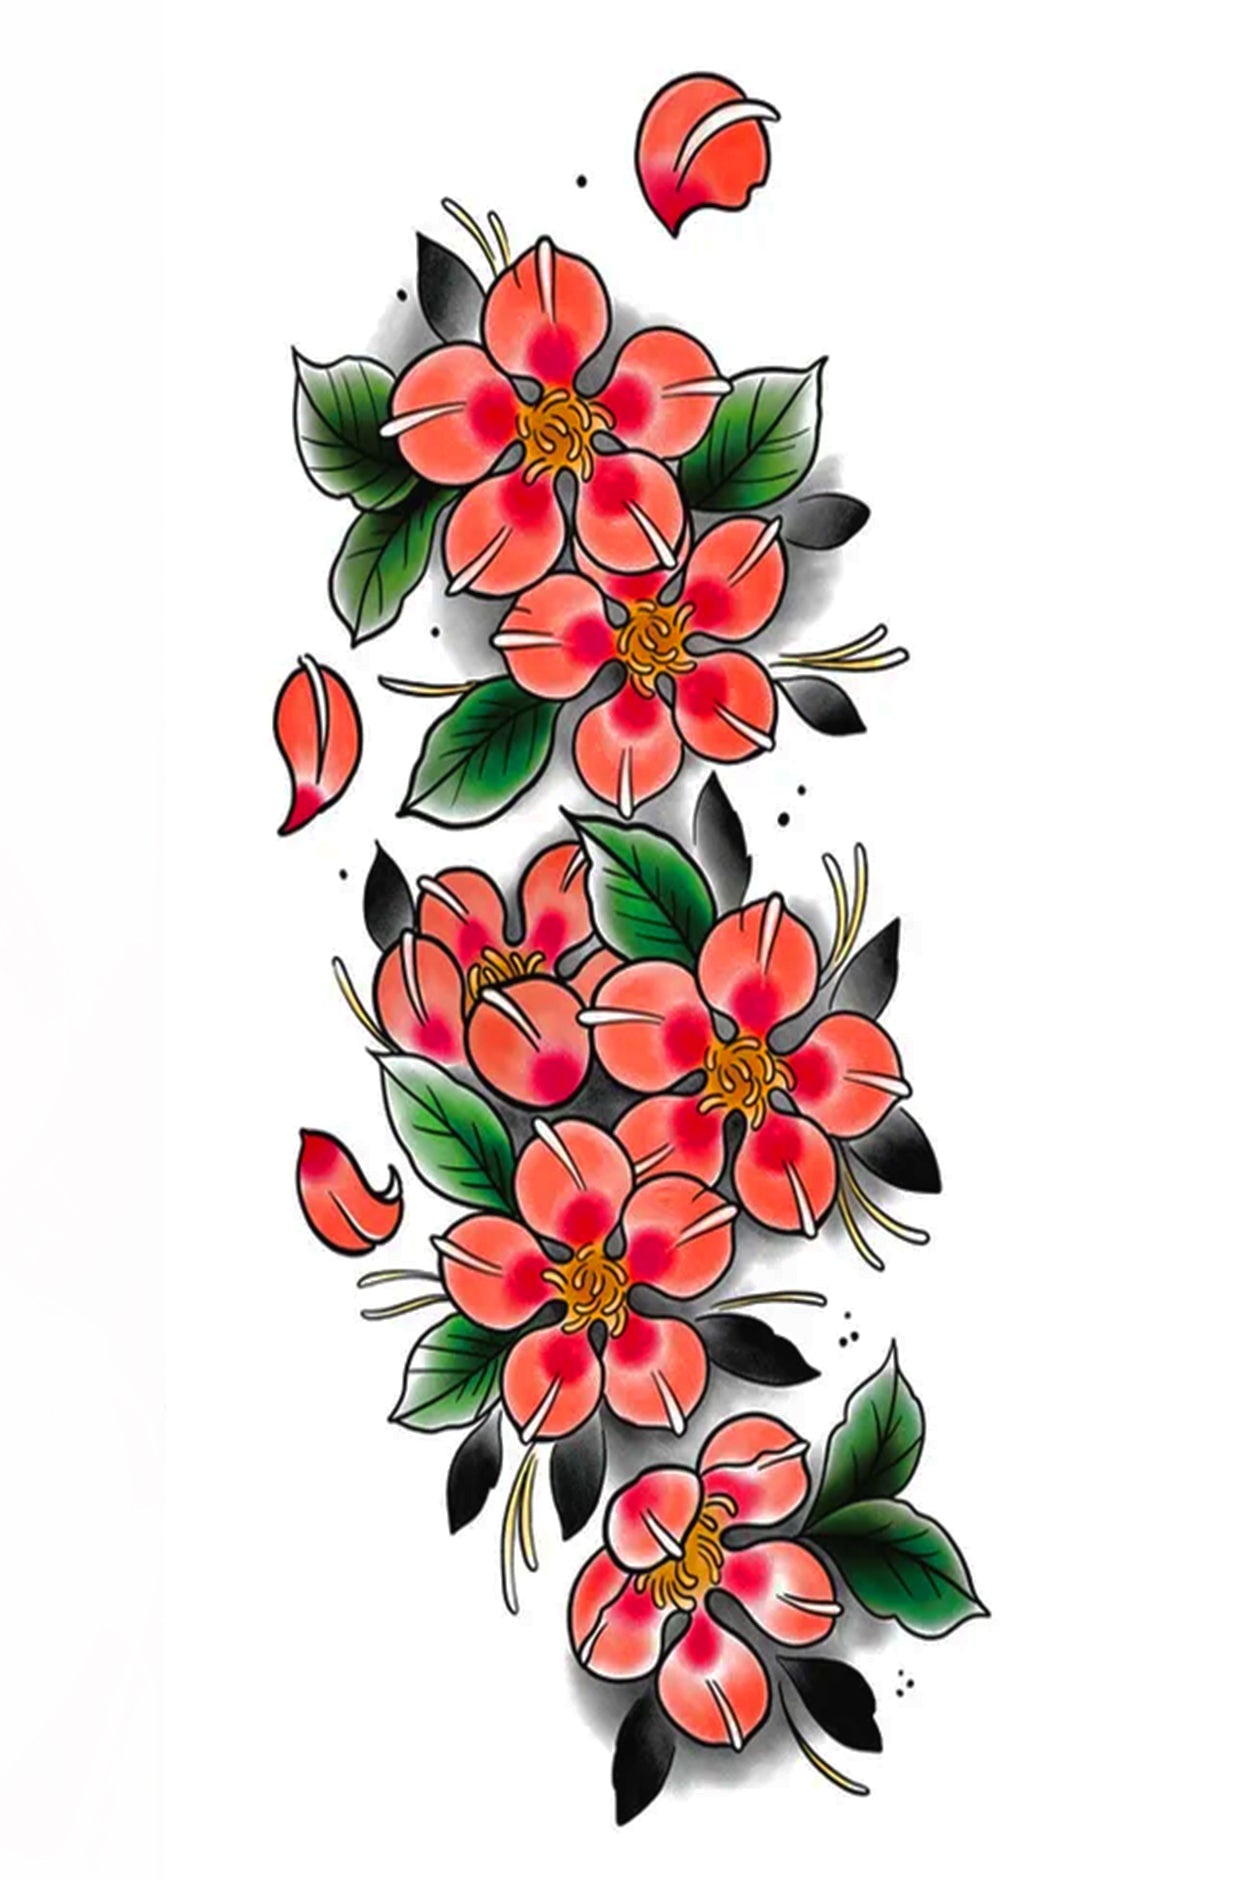 A cherry blossom is a symbolic sign of spring brining renewal, and fleeting nature of life. The blossom is also associated with conveying security freedom and happiness. This tattoo has 6 bright pink blossoms nested in leaves. This bright and friendly tag will grace and body part from arm to ankle.